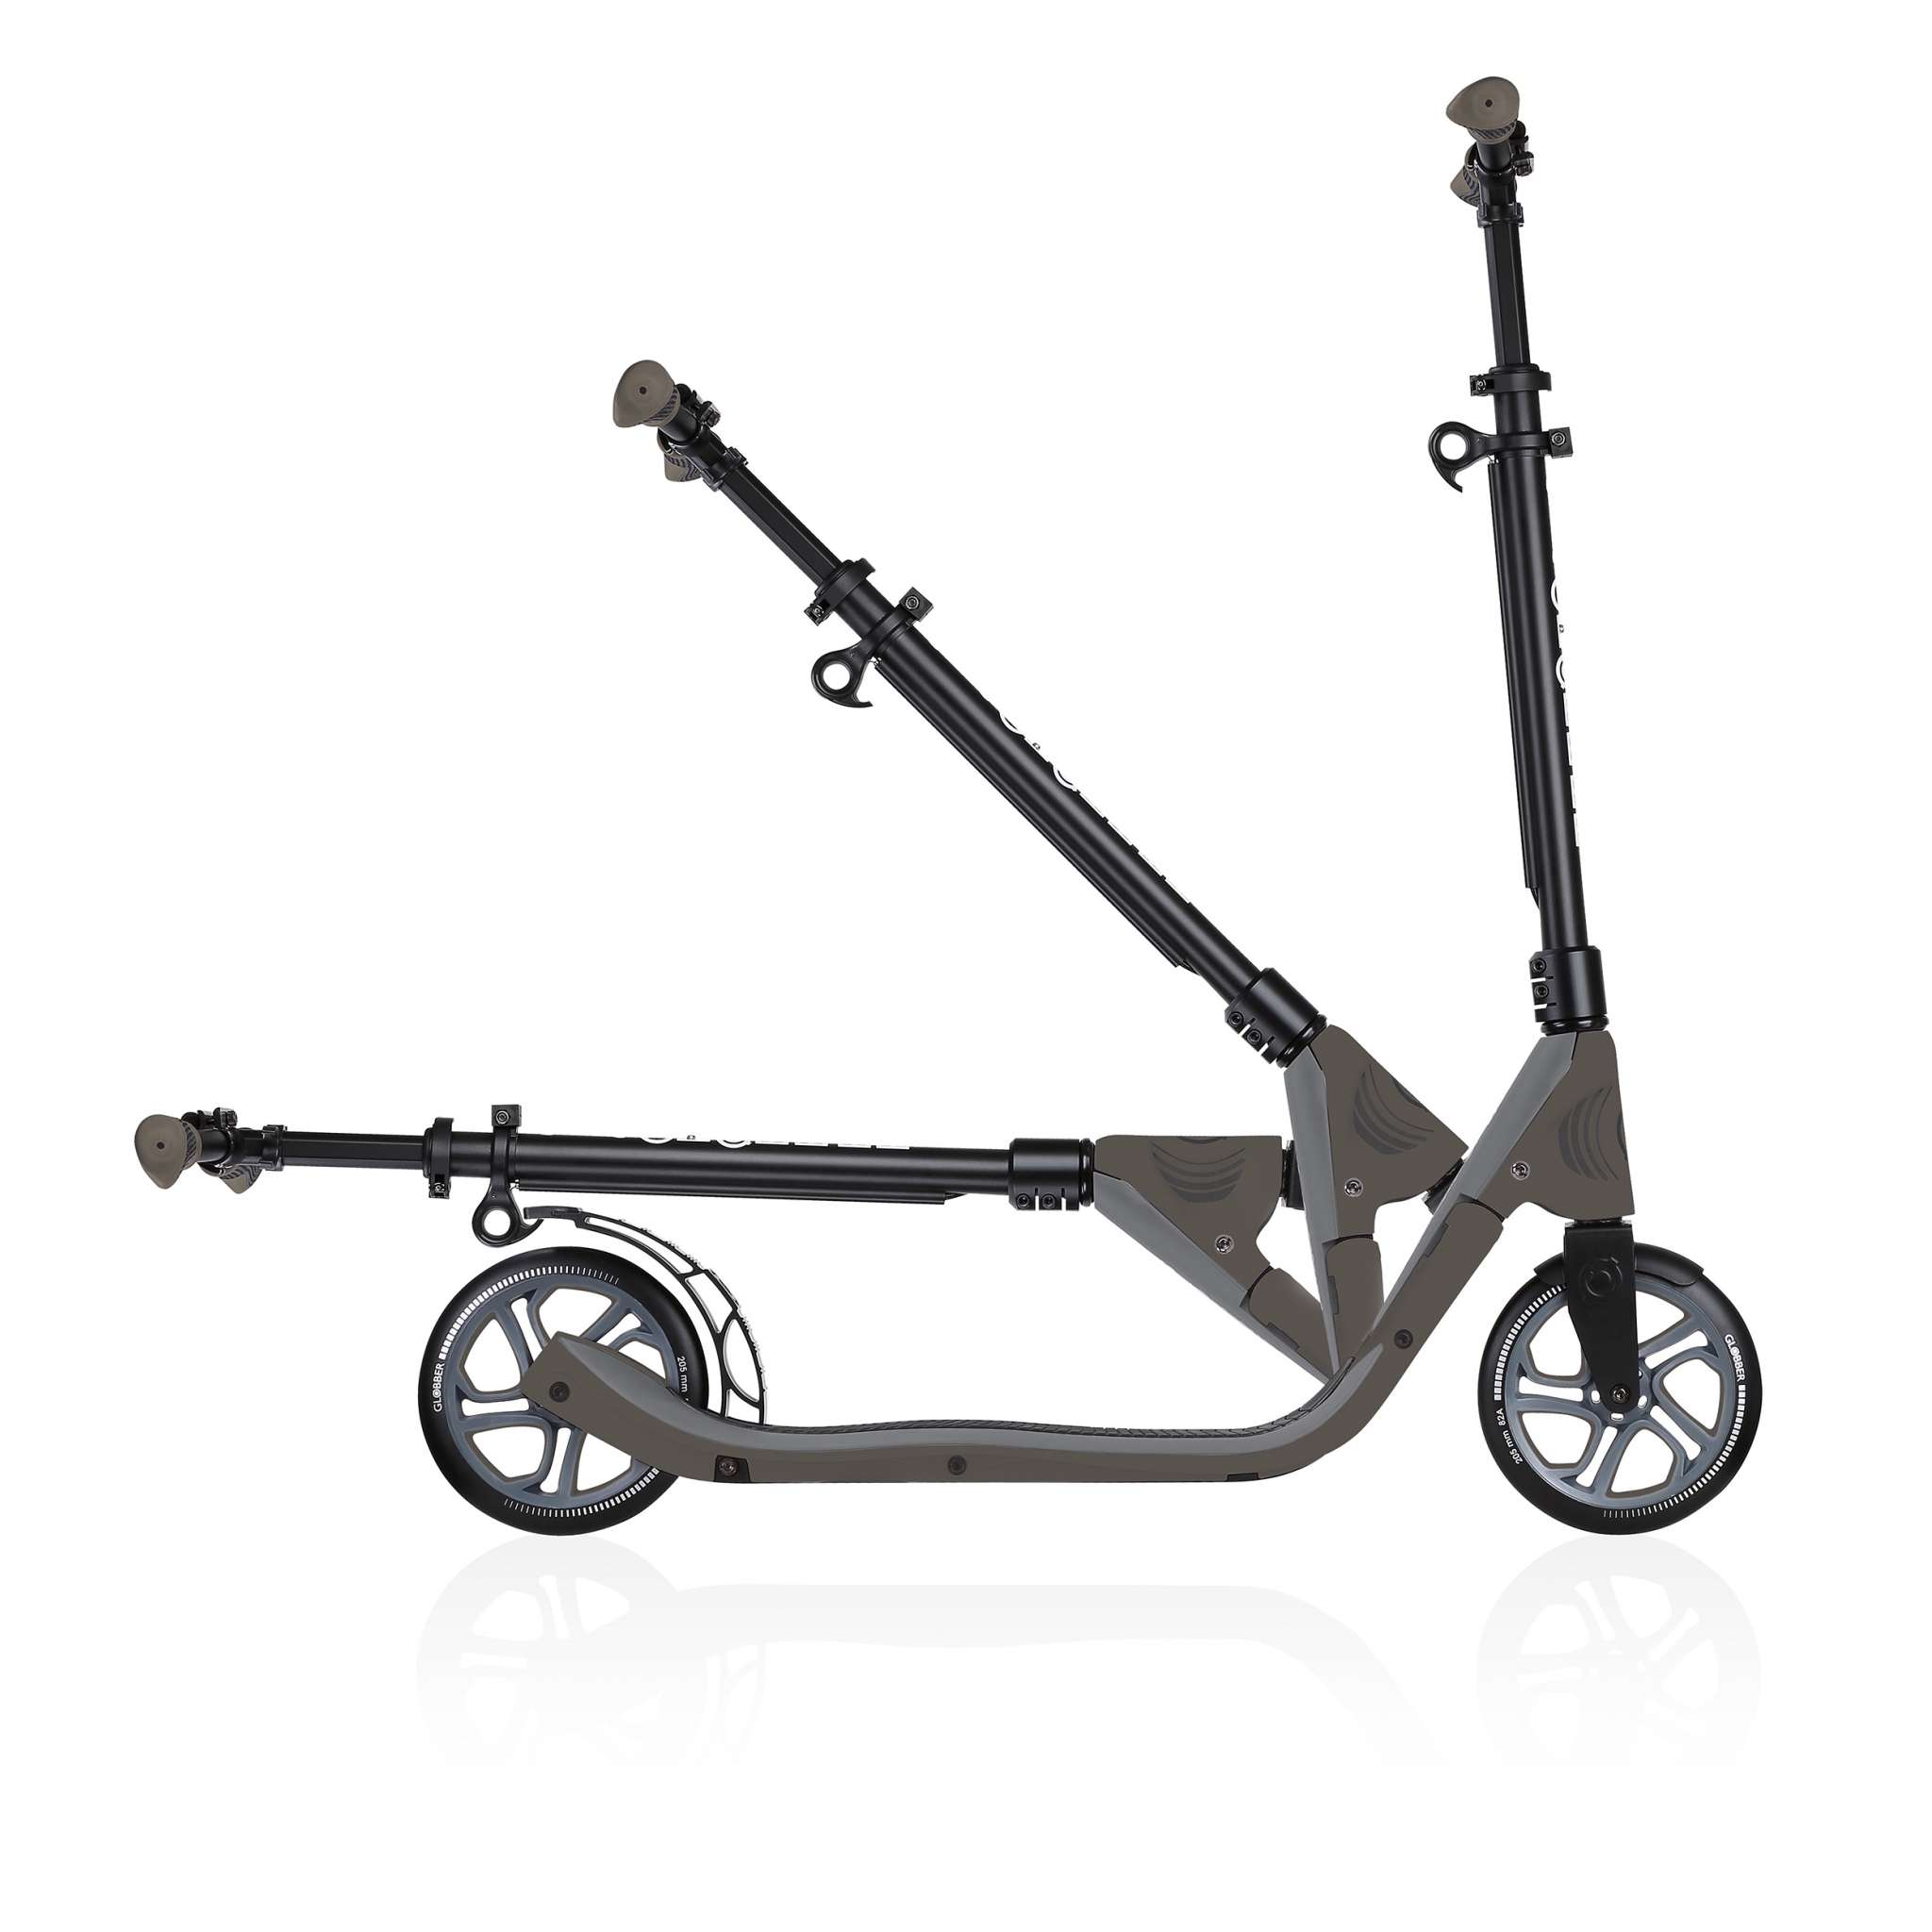 2-wheel foldable scooter for adults - Globber ONE NL 205 2